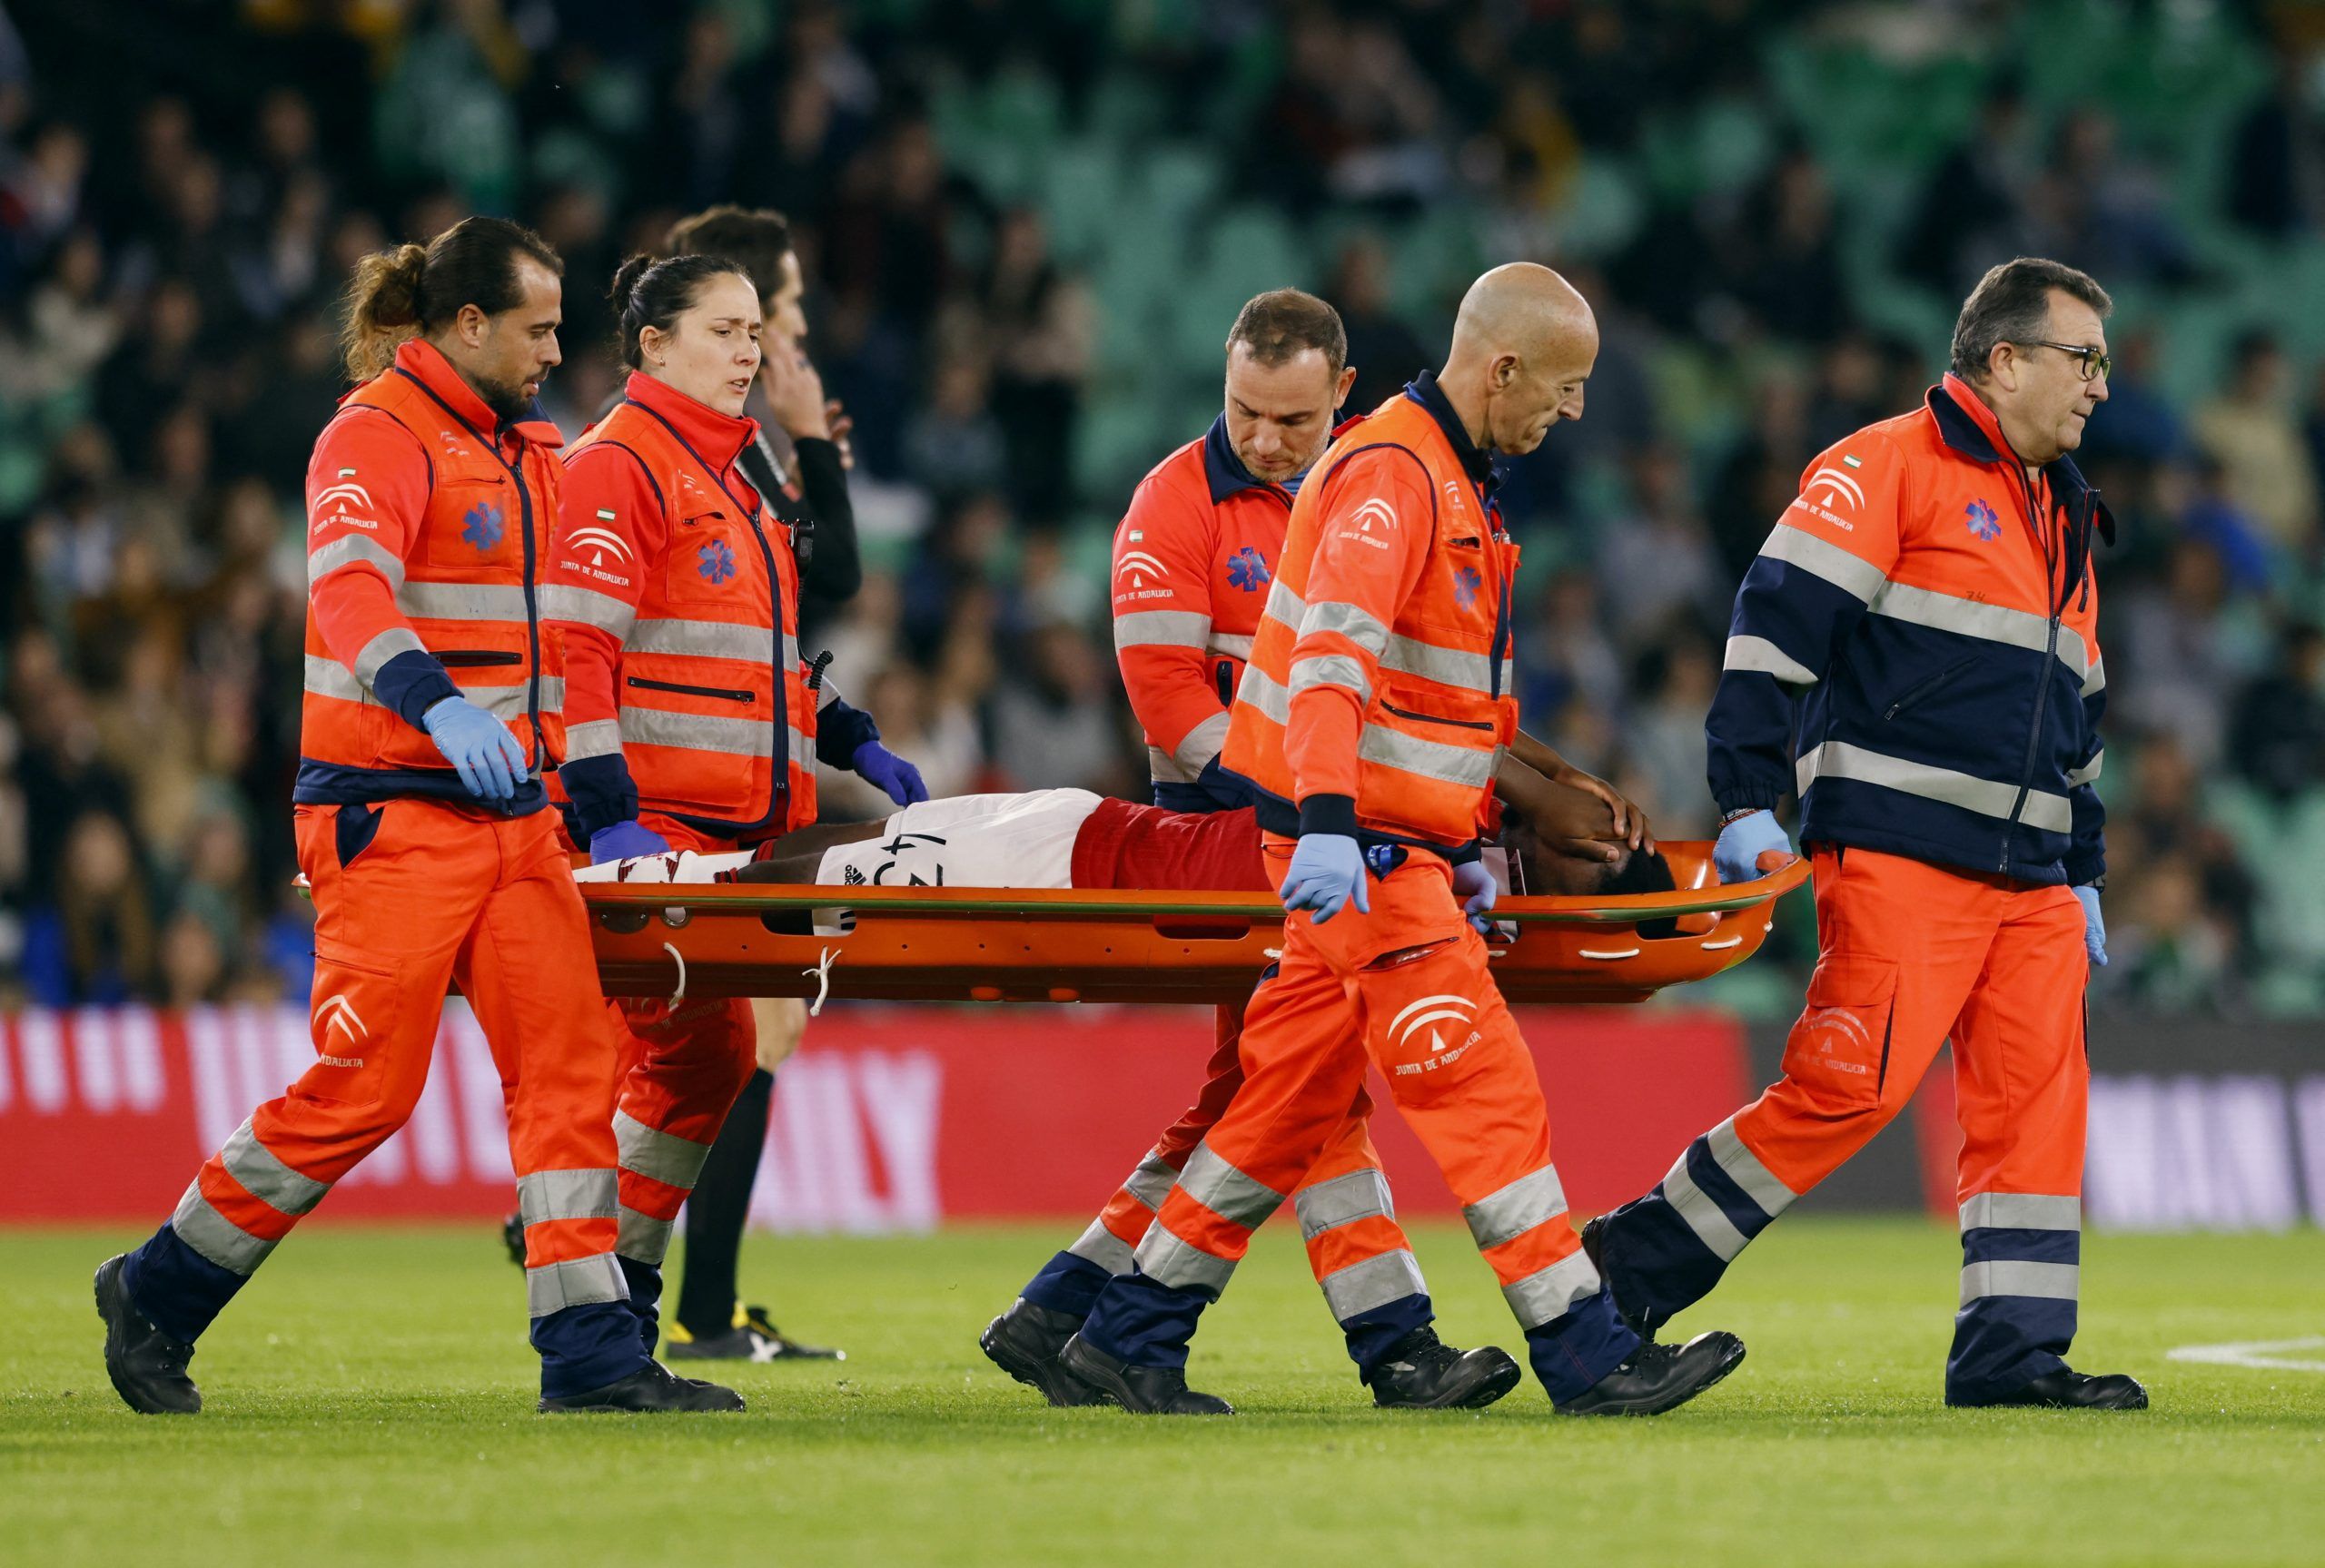 Soccer Football - Friendly - Real Betis v Manchester United - Estadio Benito Villamarin, Seville, Spain - December 10, 2022  Manchester United's Teden Mengi is stretchered off the pitch after sustaining an injury REUTERS/Marcelo Del Pozo